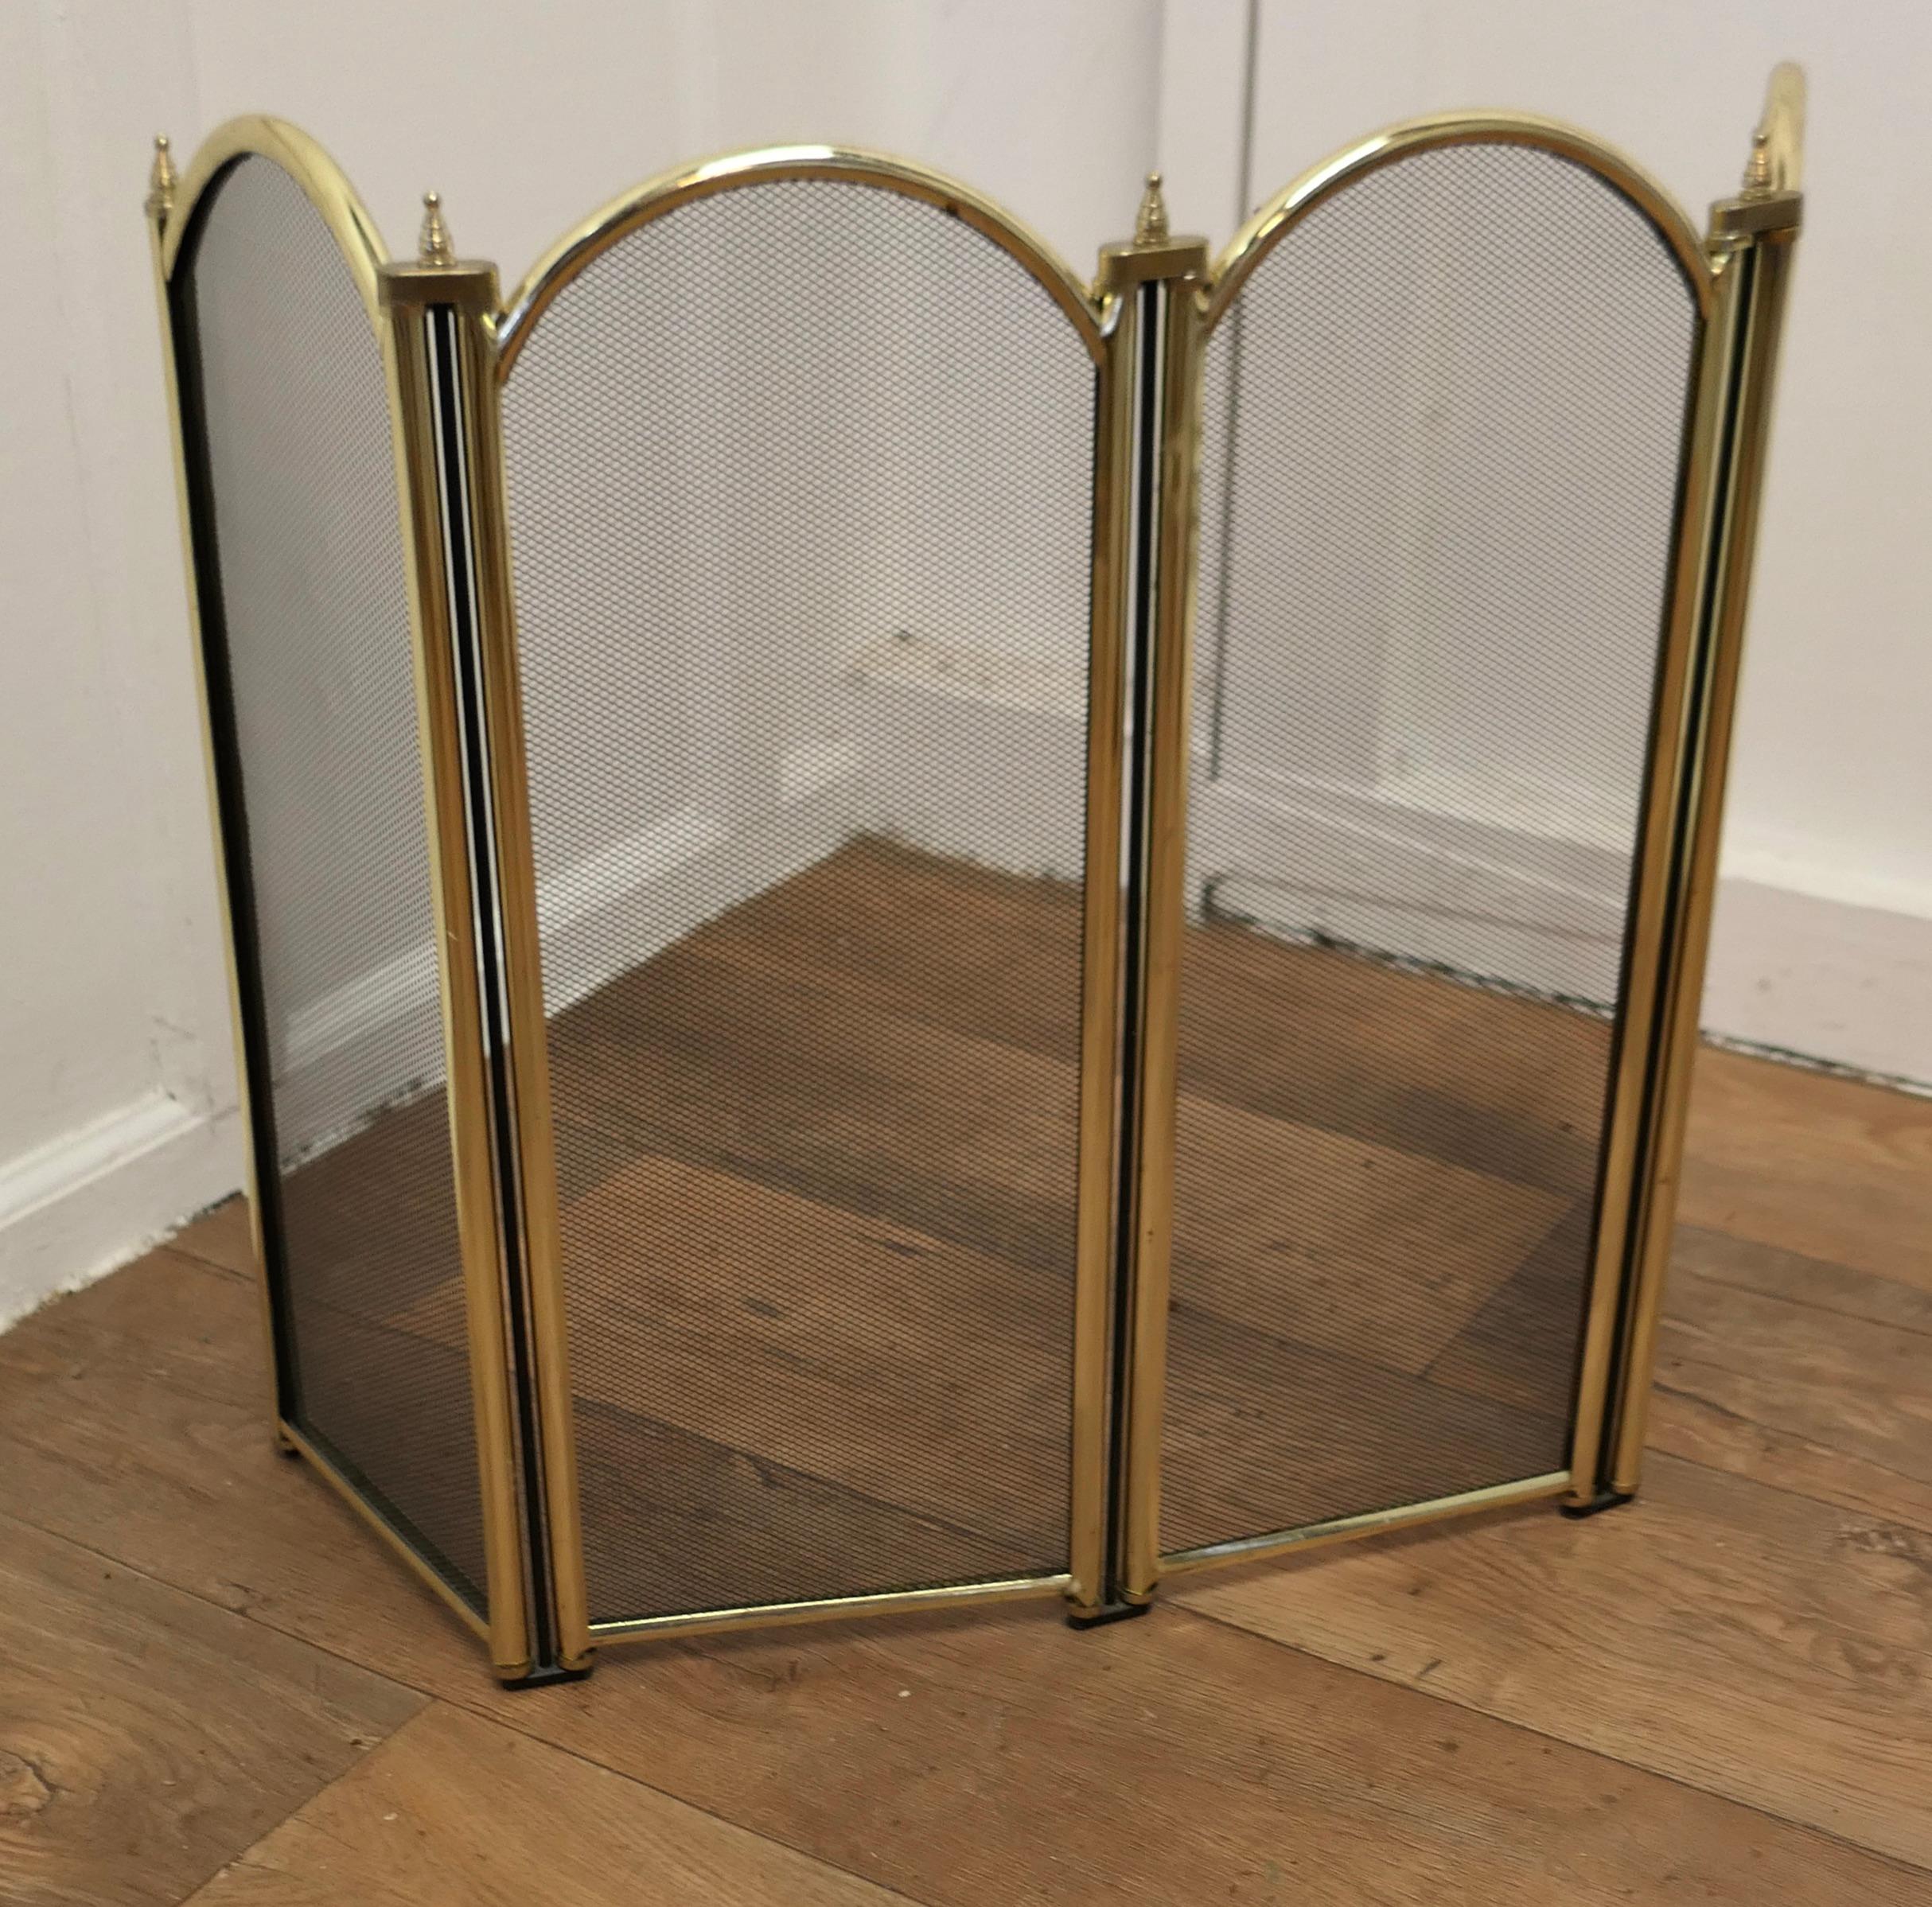  Folding Brass and Iron Fire Guard for Inglenook Fireplace    In Good Condition For Sale In Chillerton, Isle of Wight